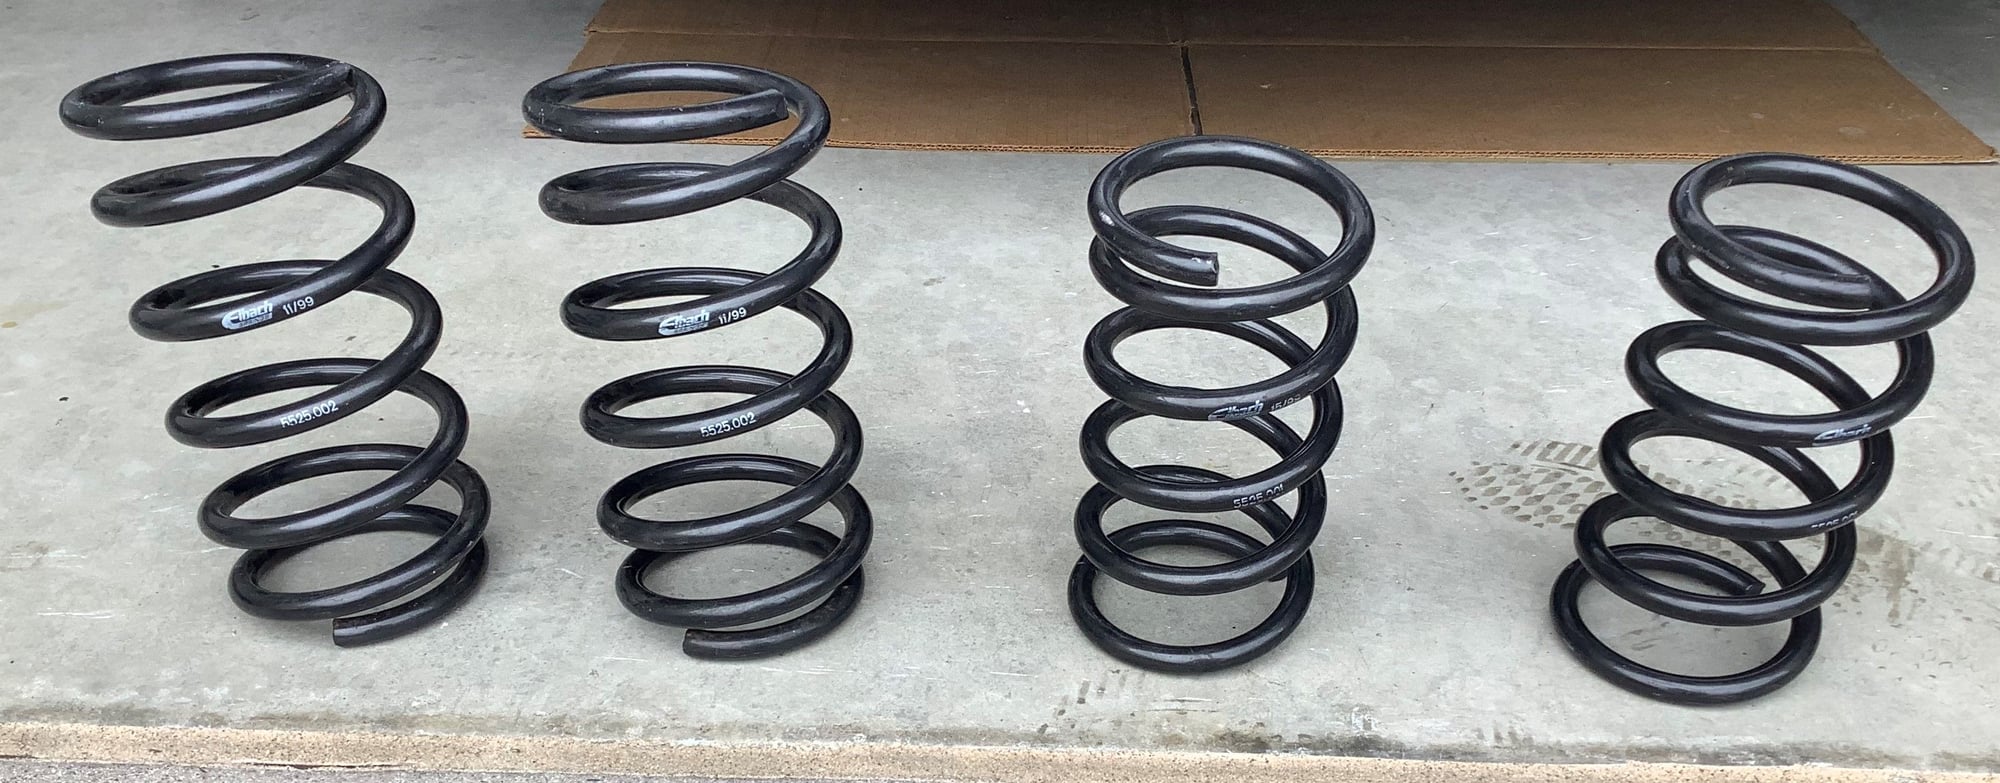 Steering/Suspension - Eibach 'PRO-KIT' Springs for 1993 1994 1995 Mazda RX-7 | Set of Four (4) - Used - 1993 to 1995 Mazda RX-7 - Mission Viejo, CA 92694, United States